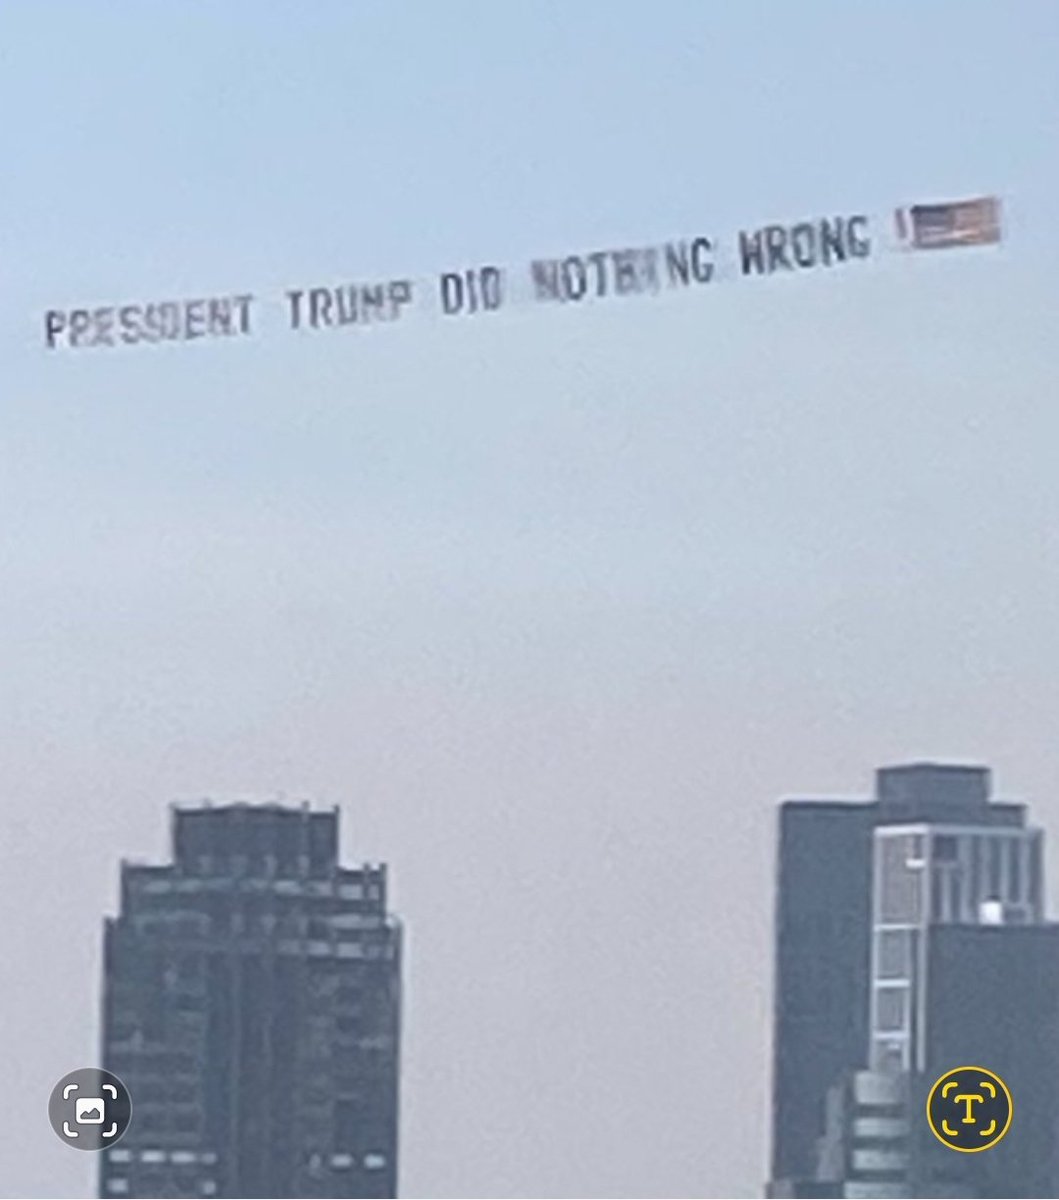 Another banner flying over New York today. Everyone knows President Trump did nothing wrong! This trial is a complete sham.